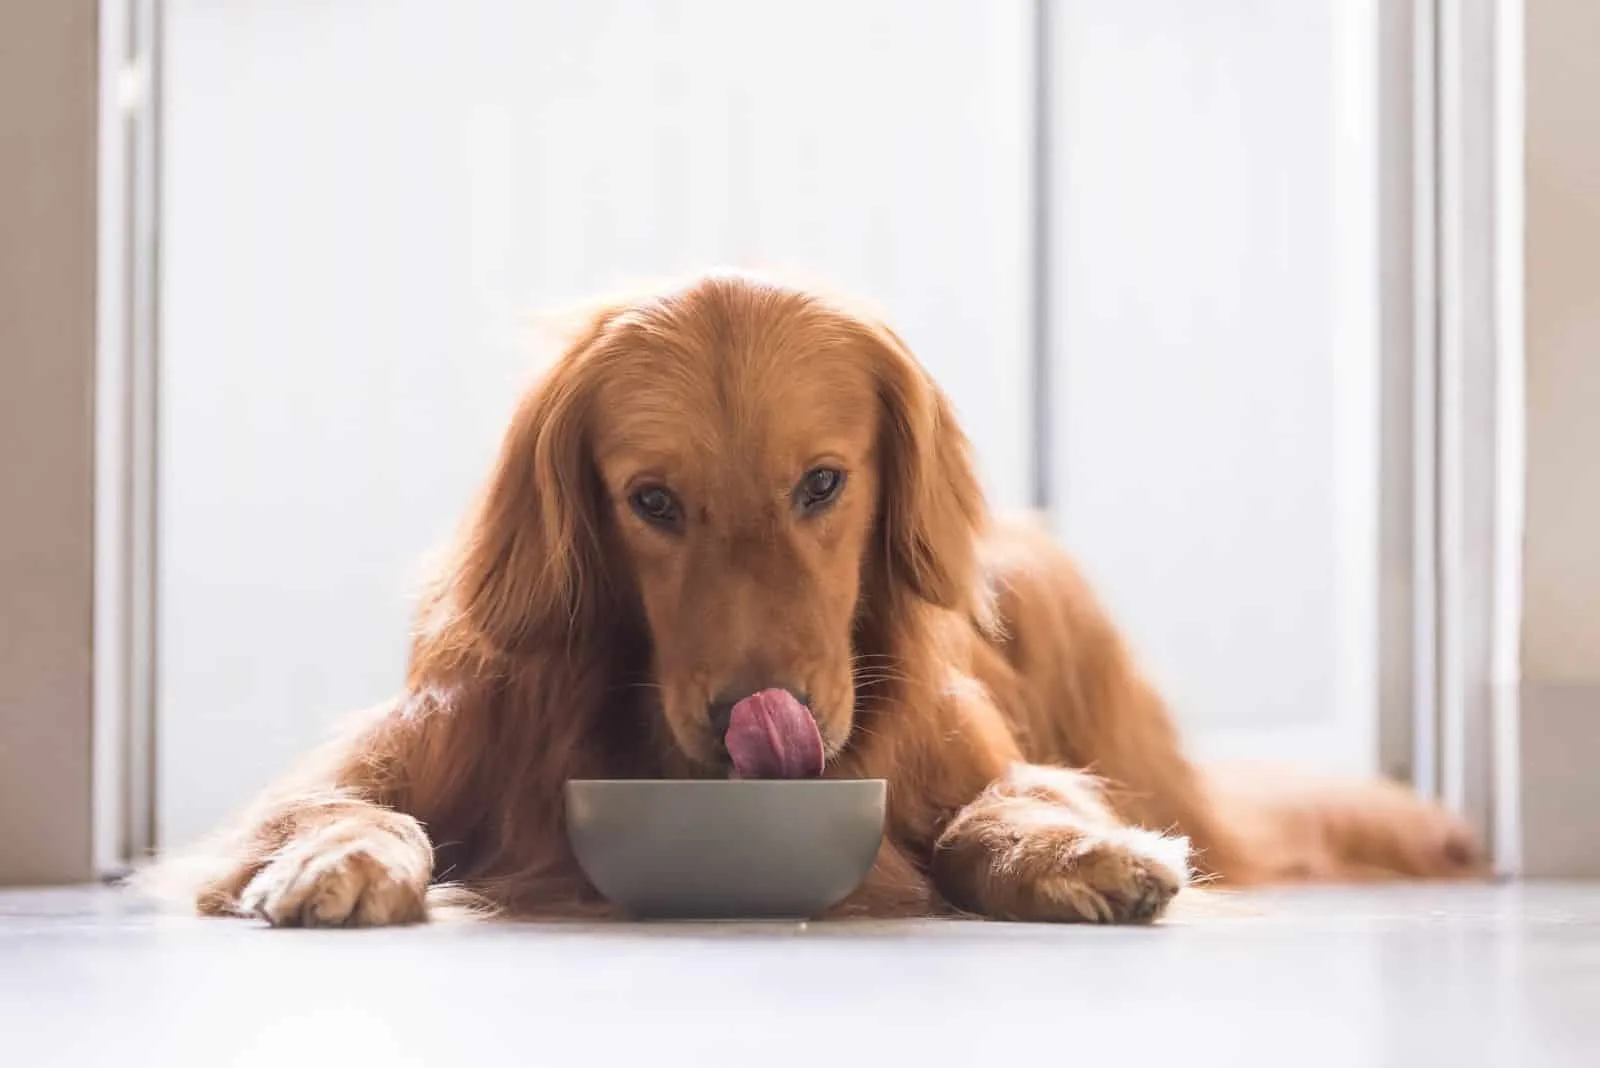 the dog licks itself while sitting in front of the bowl